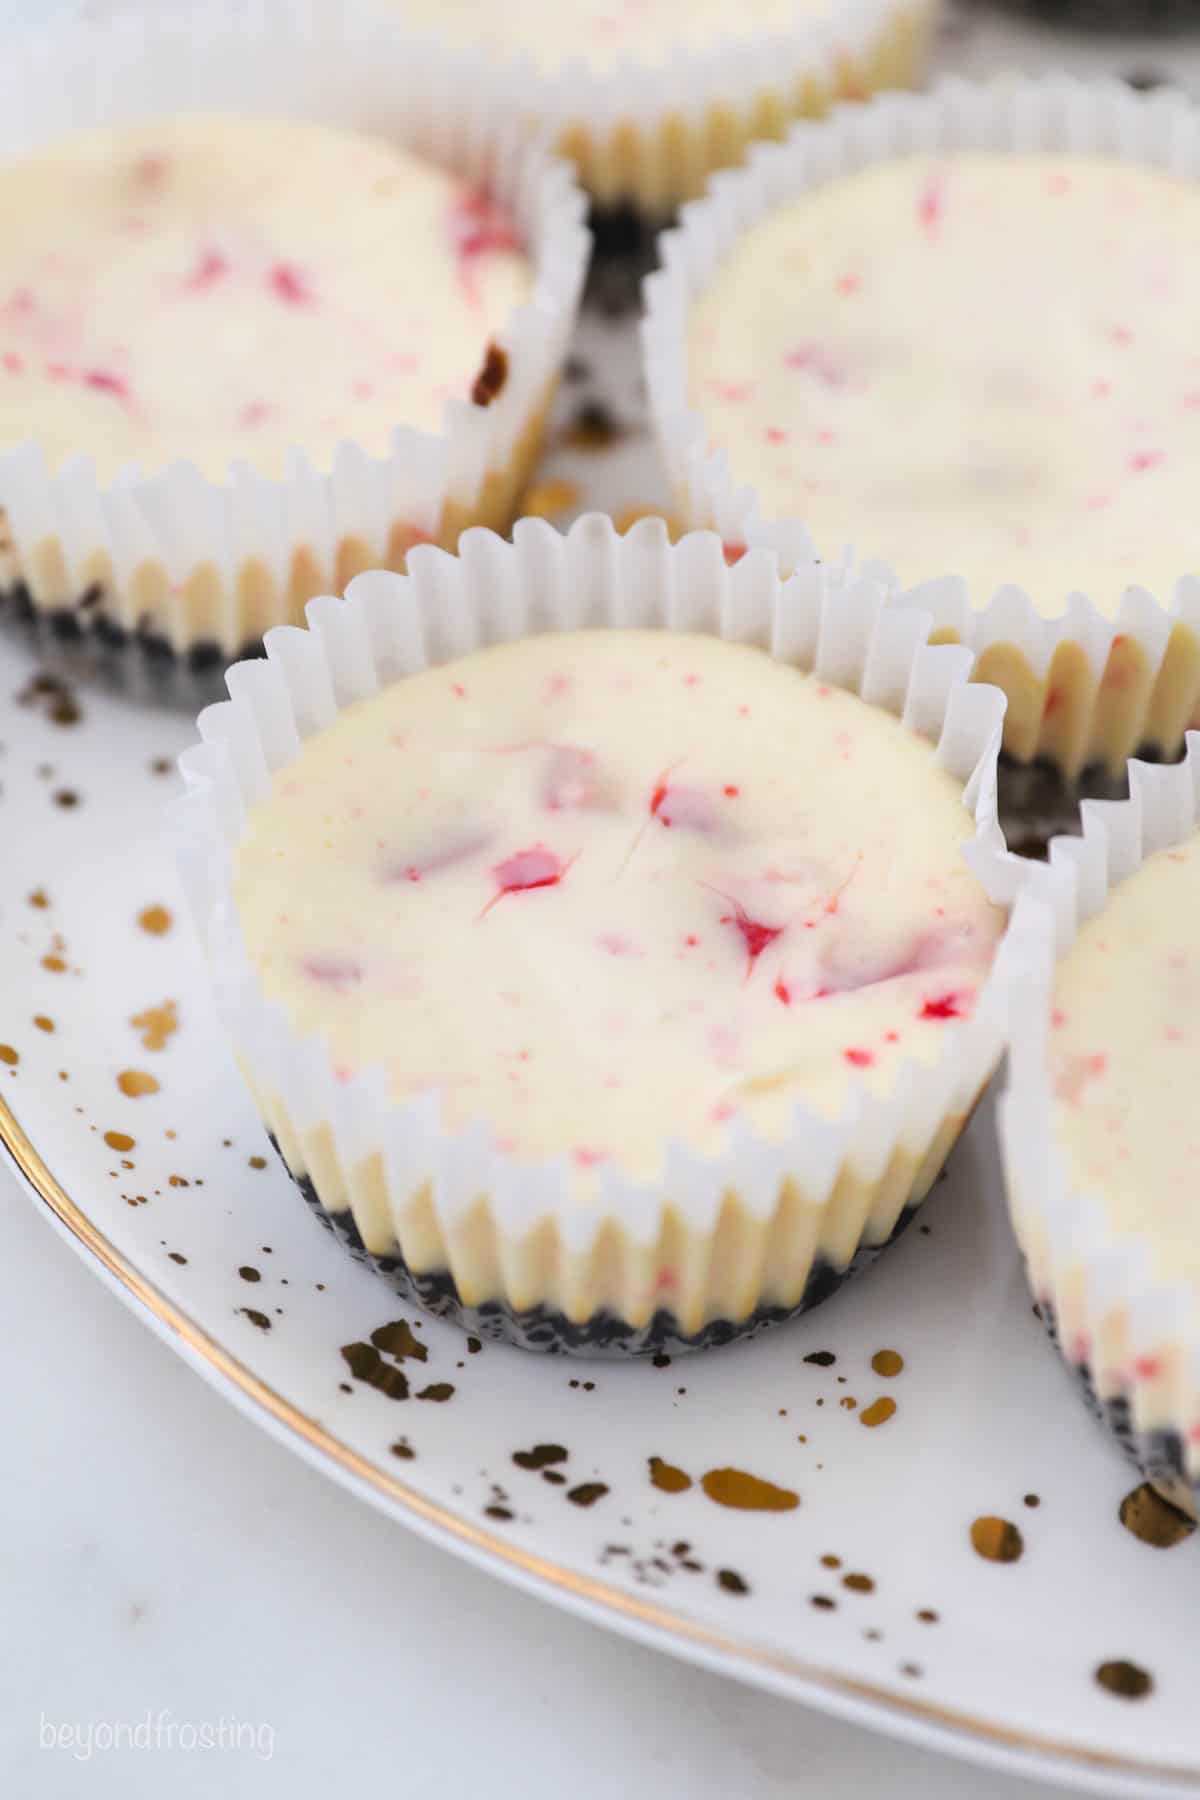 baked peppermint cheesecakes on a gold polka dot plate